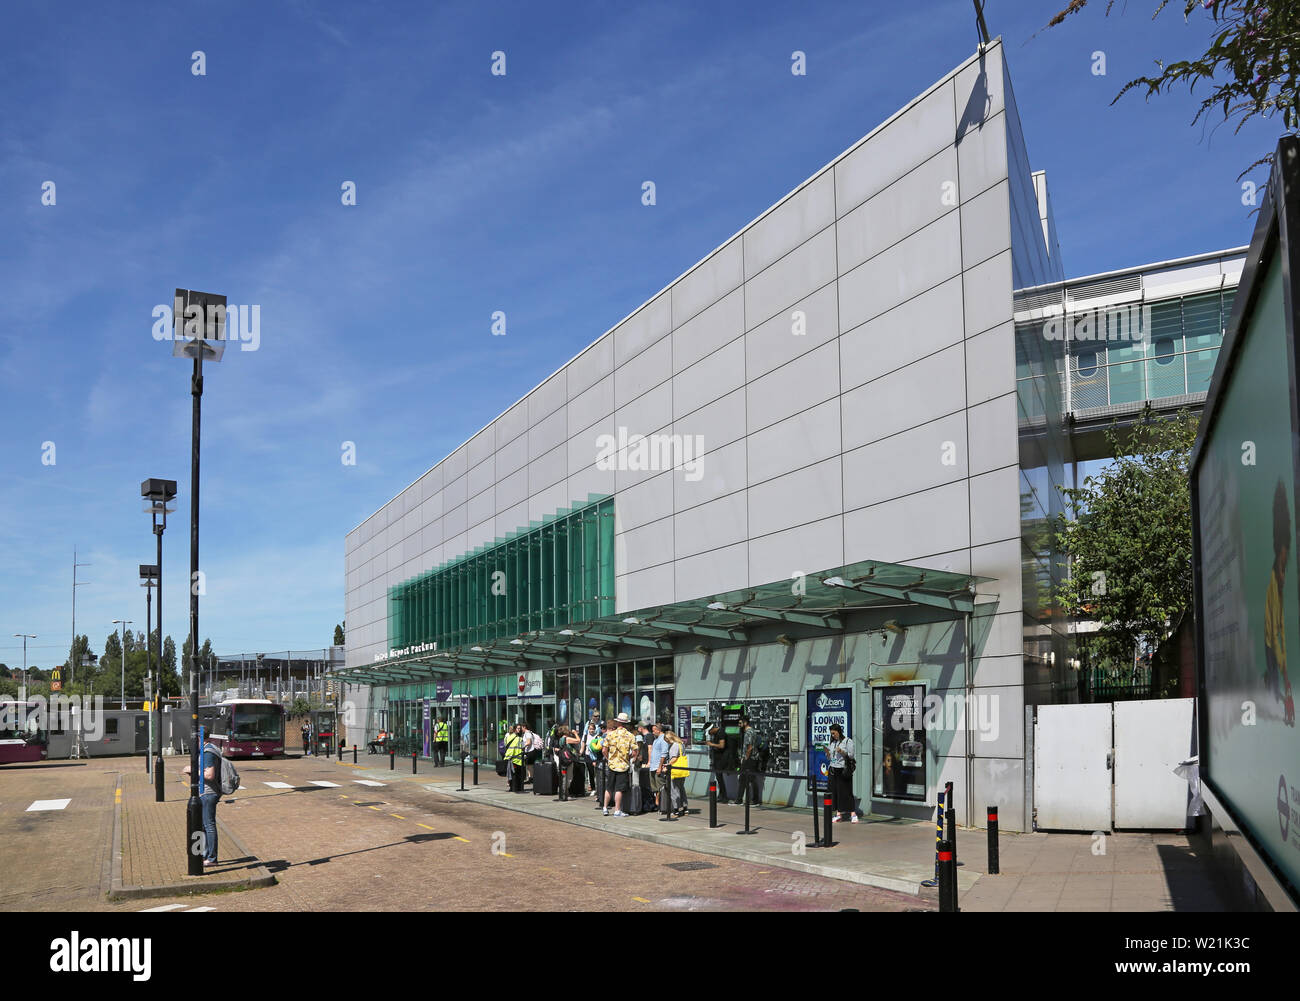 Luton Airport, London. Passengers arriving at at Luton Airport Parkway Station wait for the shuttle bus to the airport terminal. Stock Photo